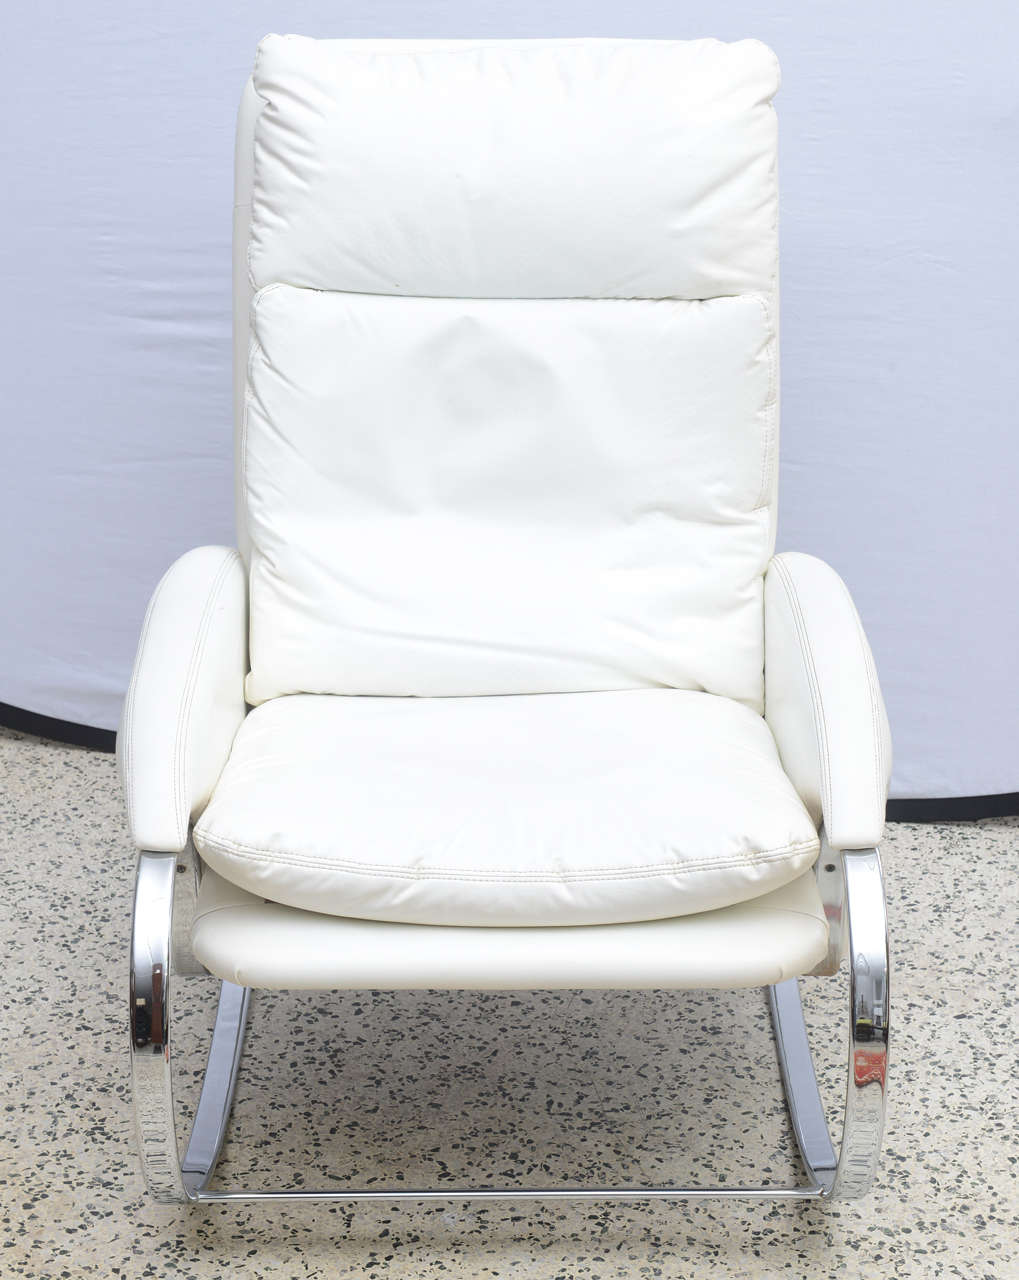 Cool Milo Baughman style chrome rocking chair covered in white vinyl.  USA 1970s